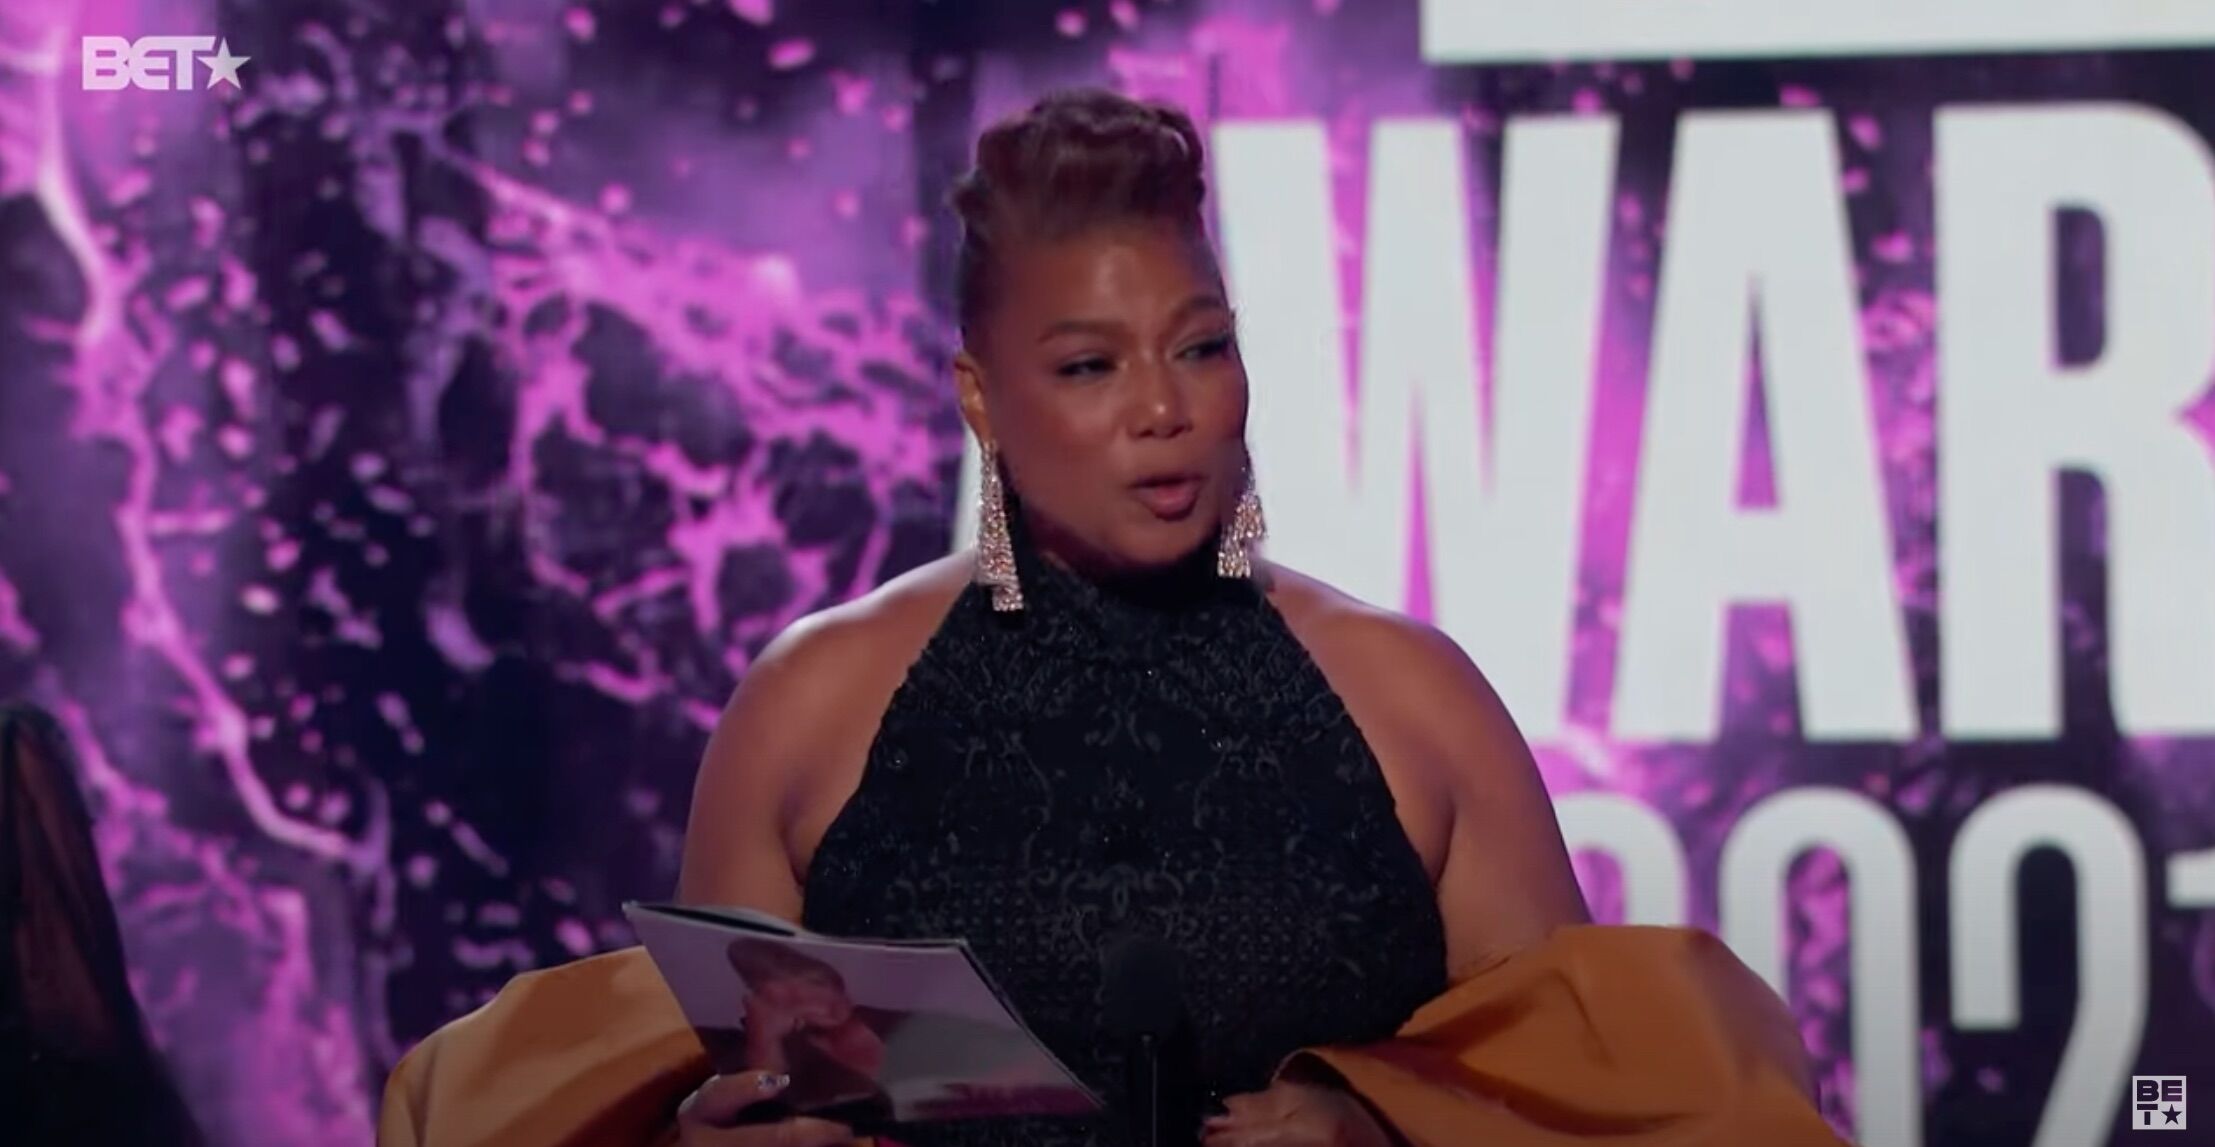 Queen Latifah accepts the Lifetime Achievement Award at the 2021 BET Awards.